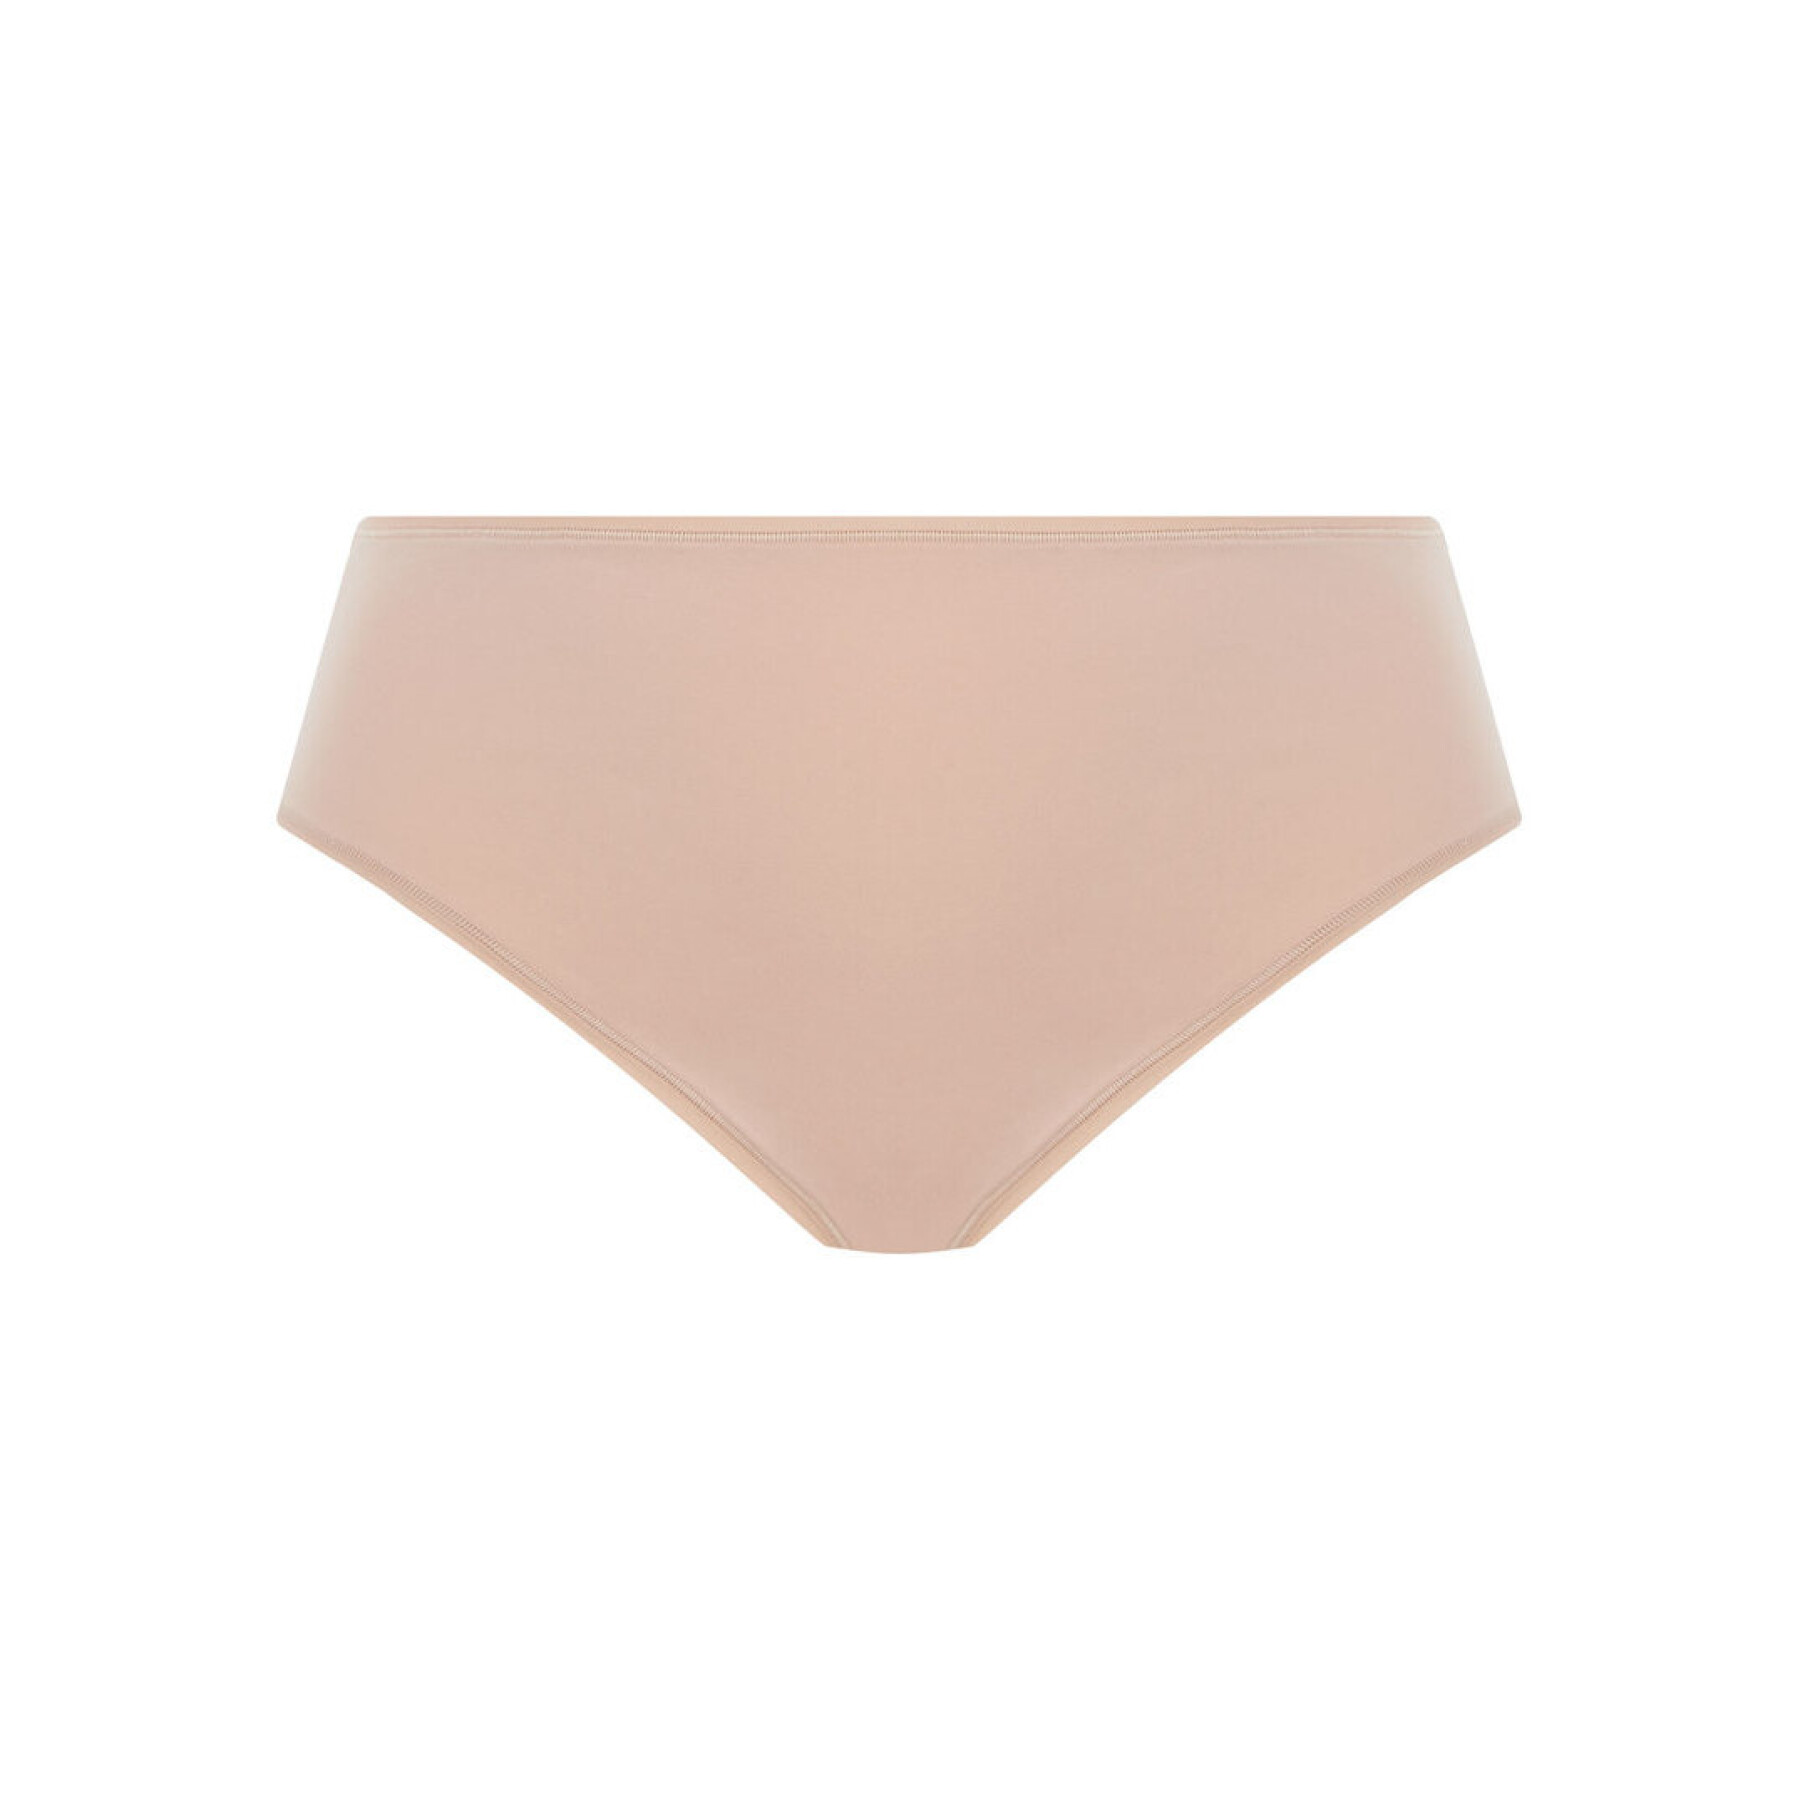 Culotte femme Elomi Smooth